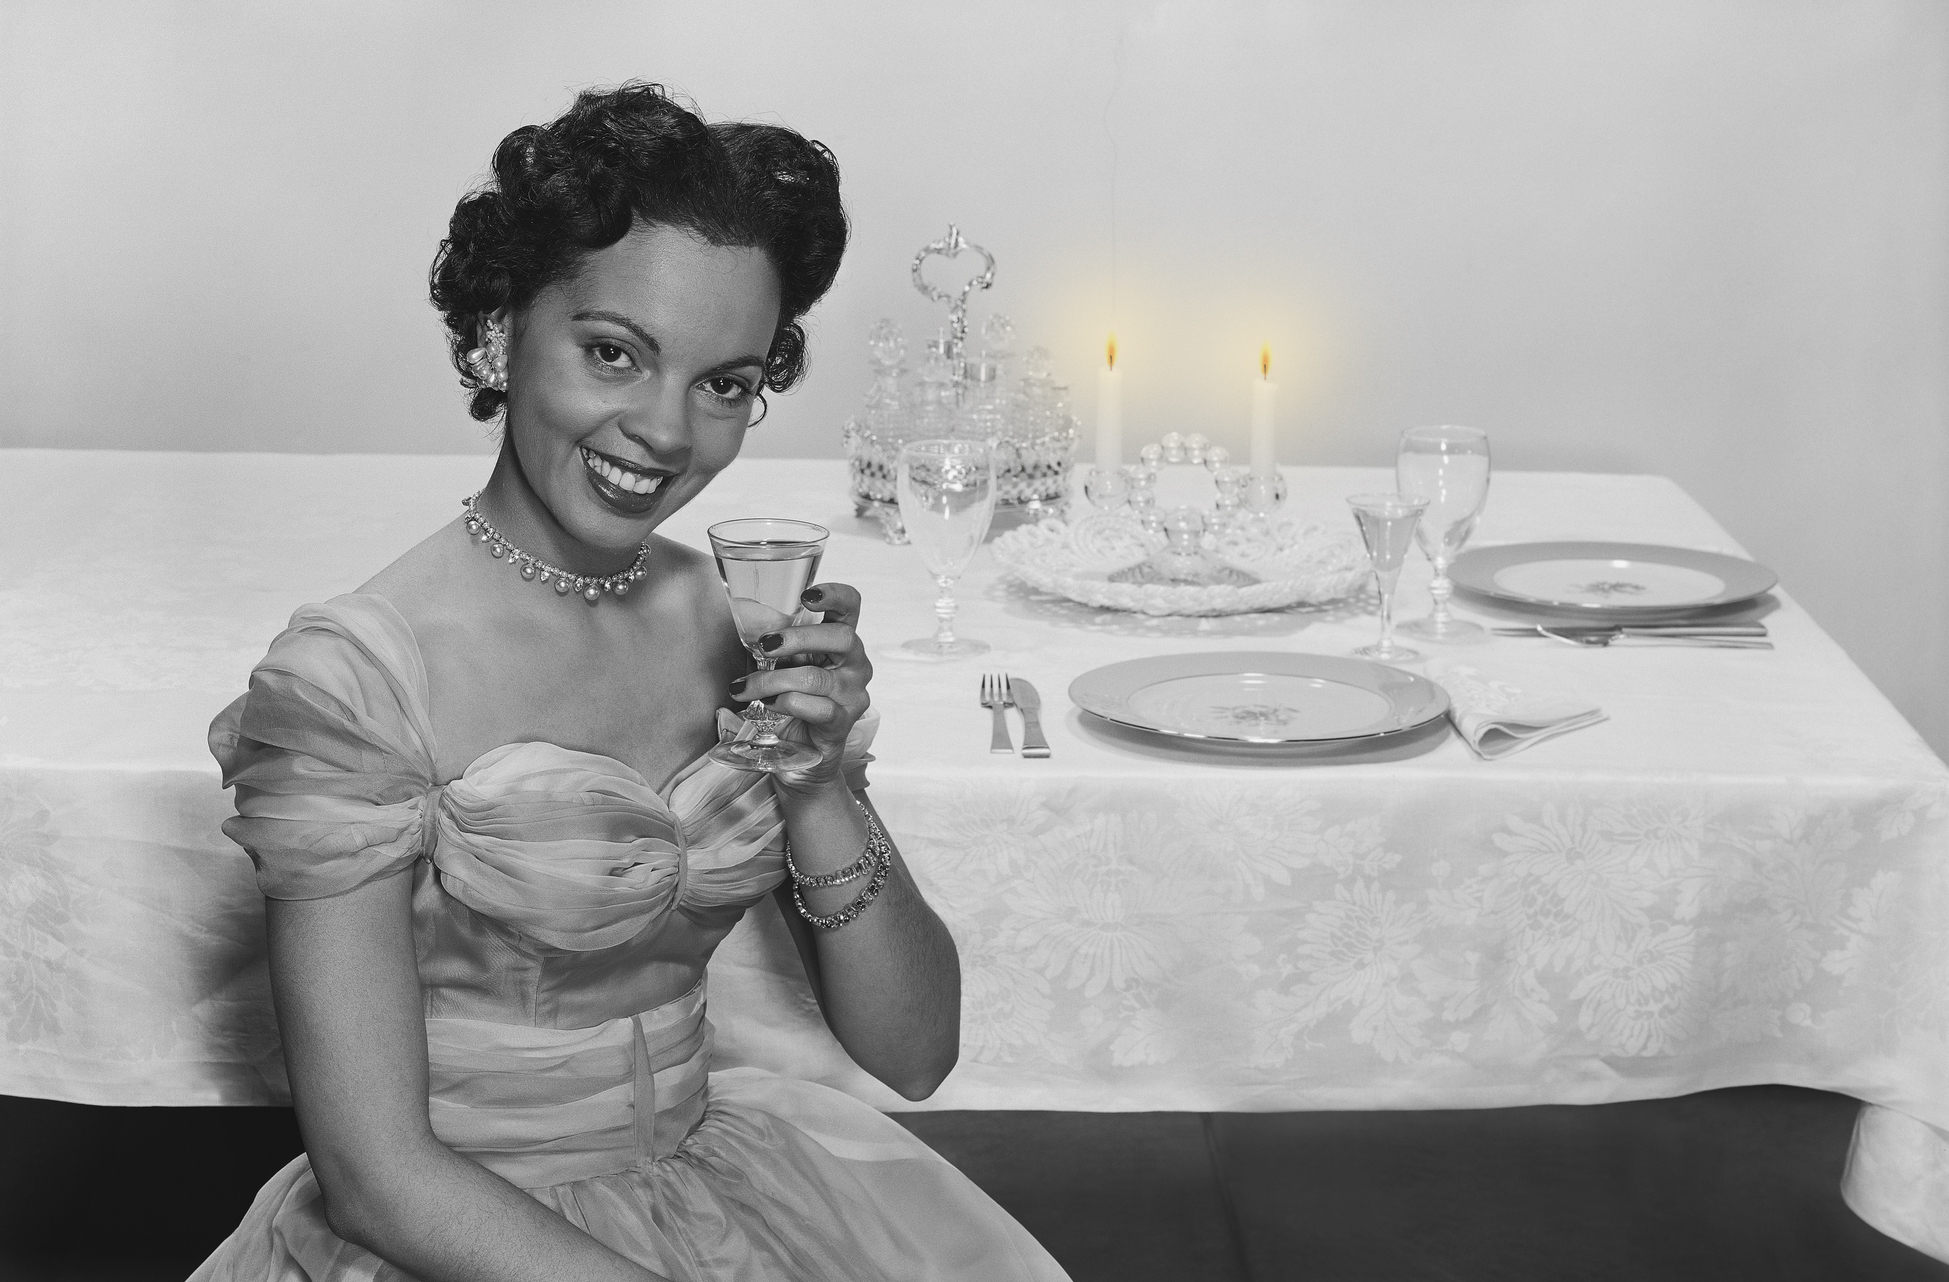 Woman holding glass of drink, smiling, portrait